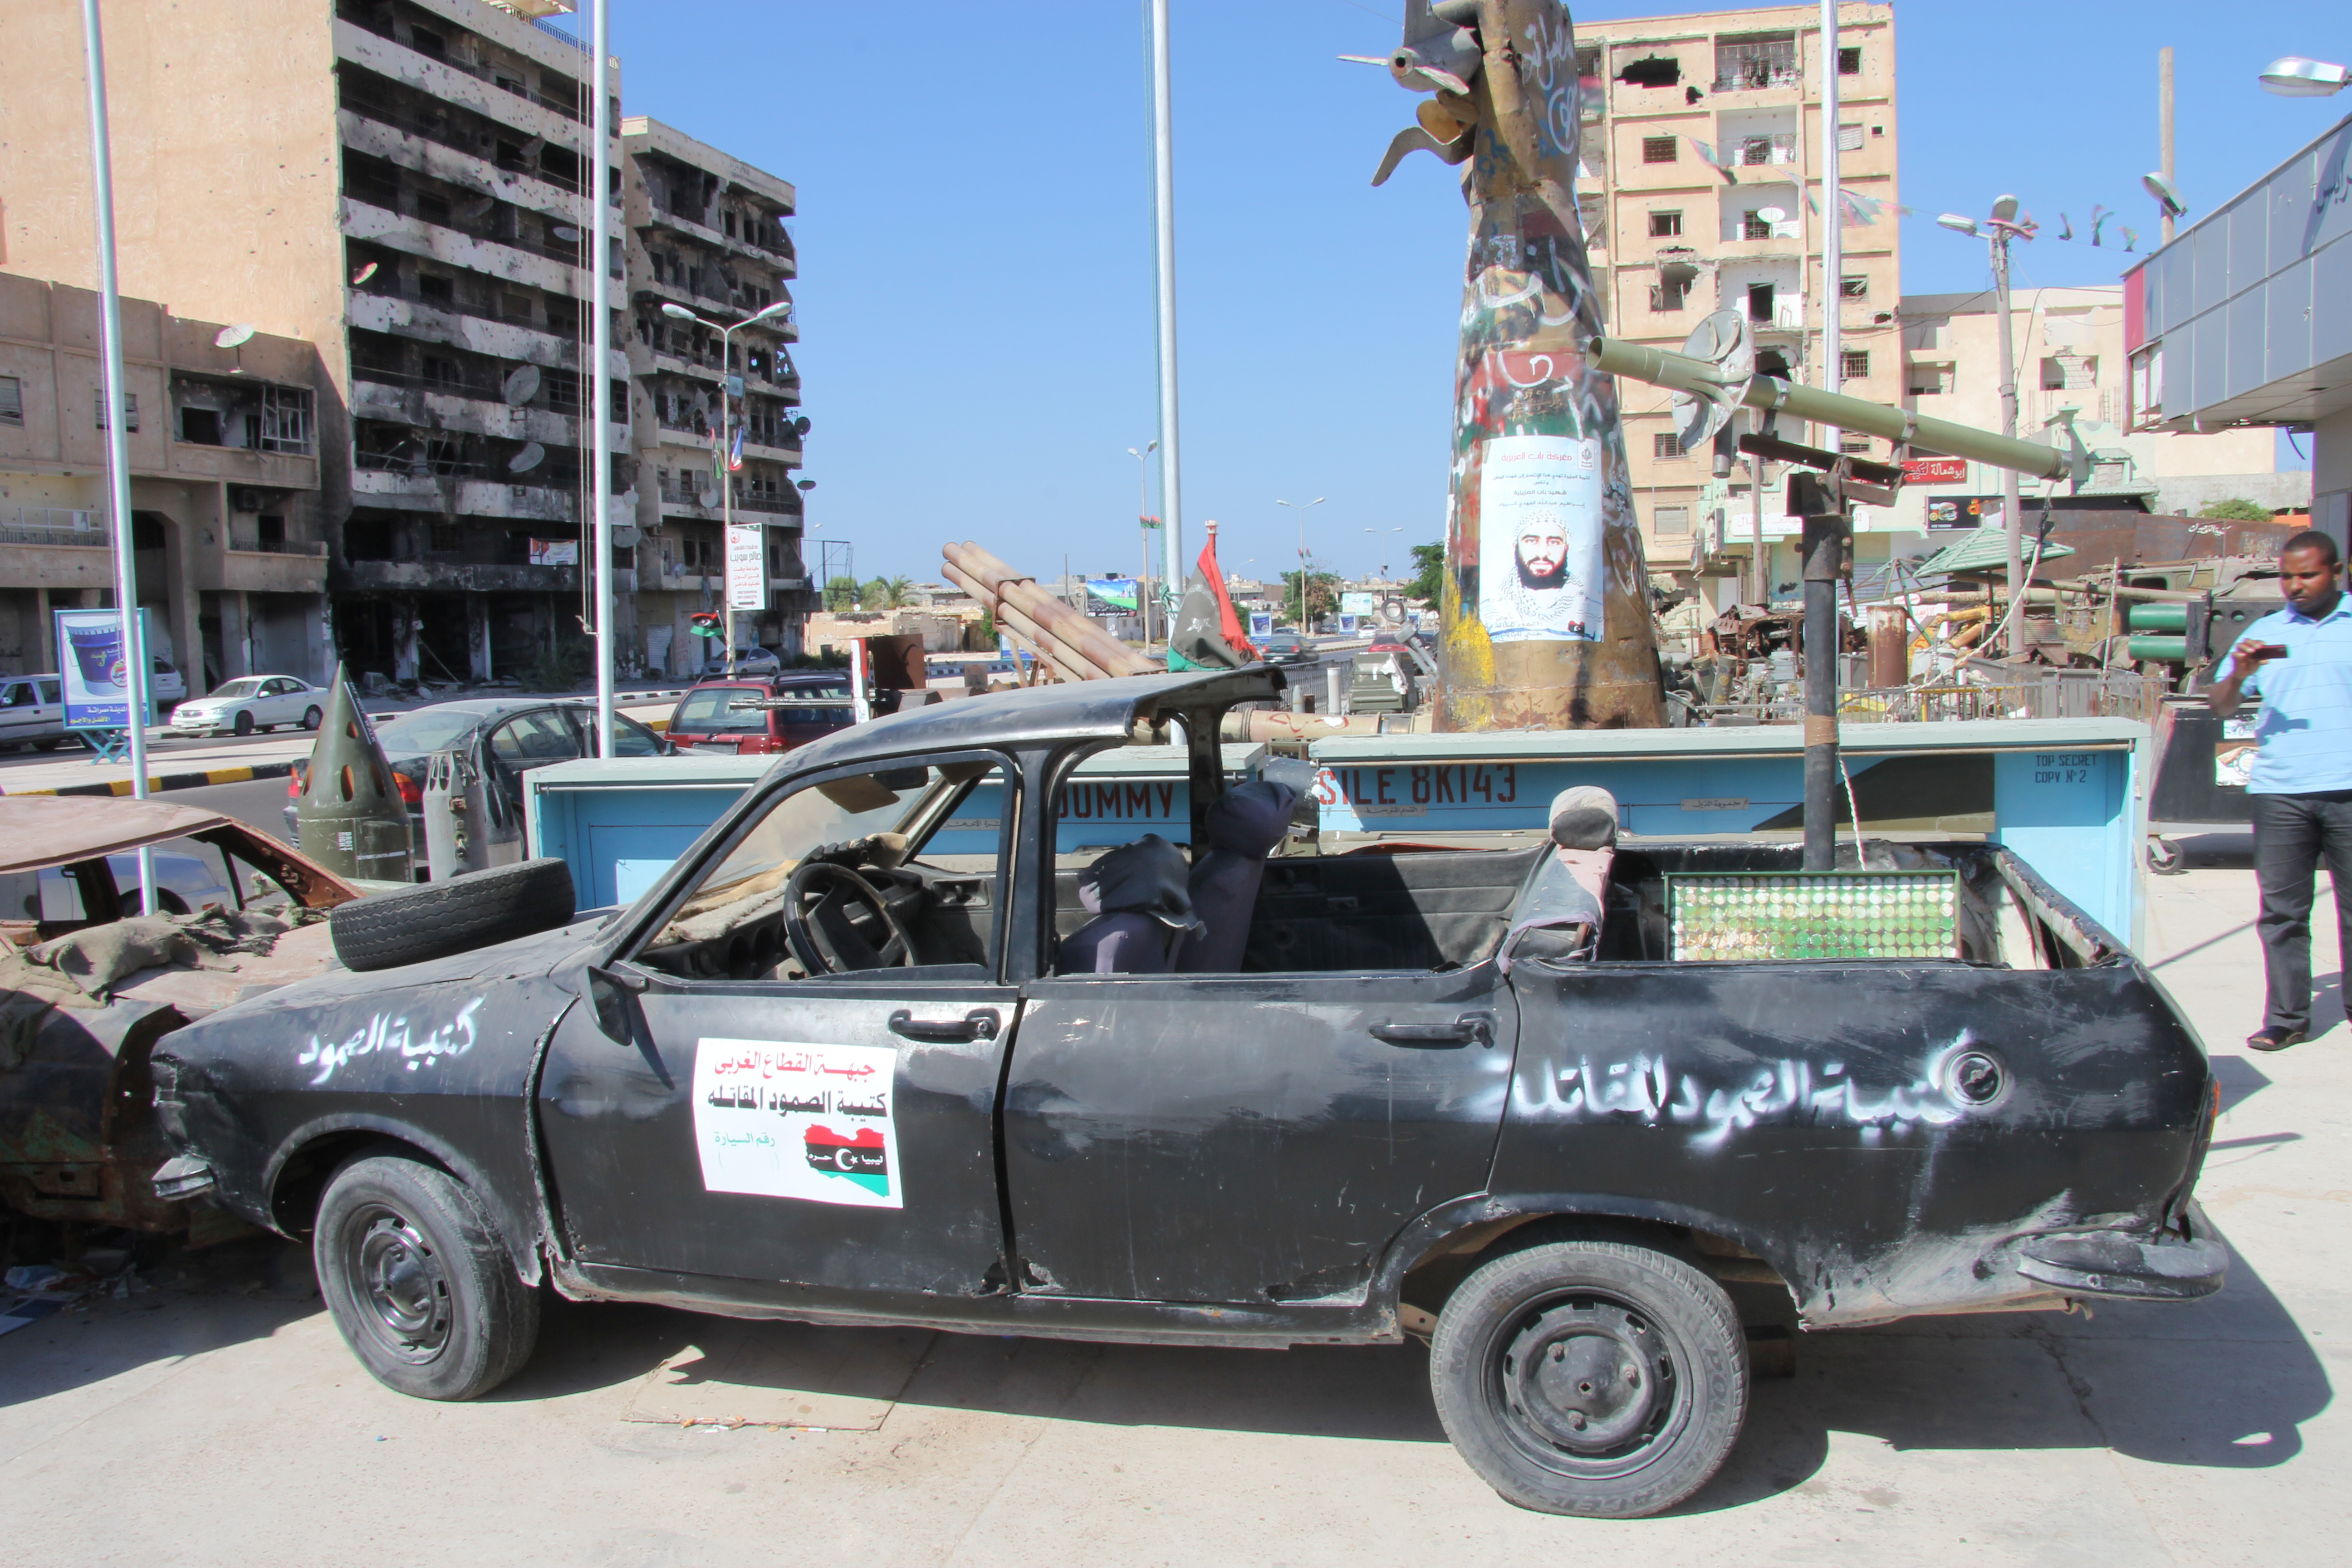 A 4x4 converted to an RPG launcher in Misrata, 